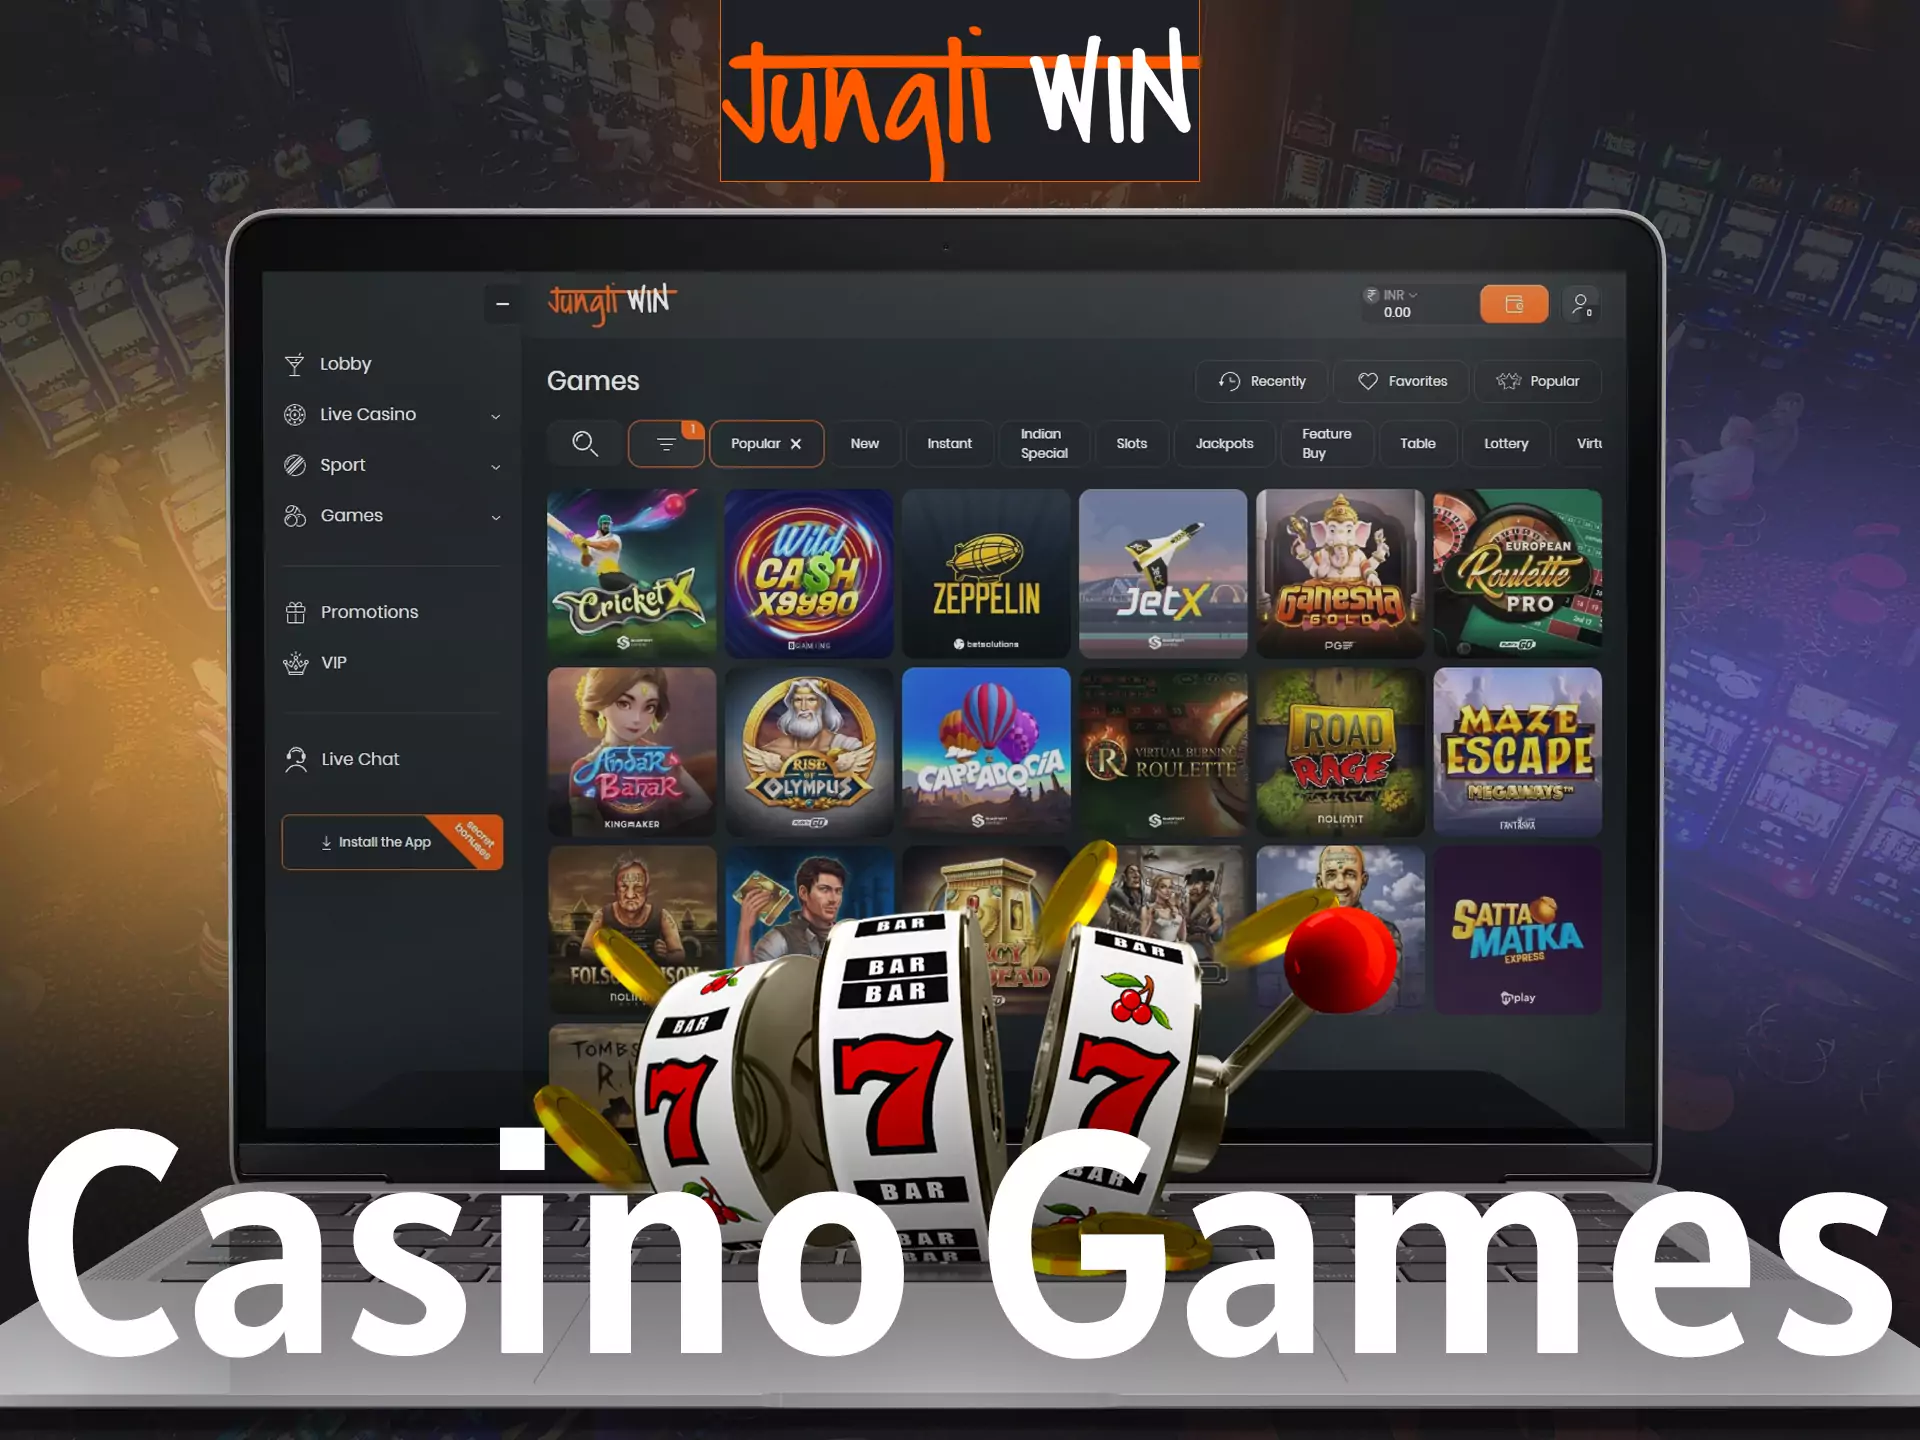 On Jungliwin you can play various casino games.